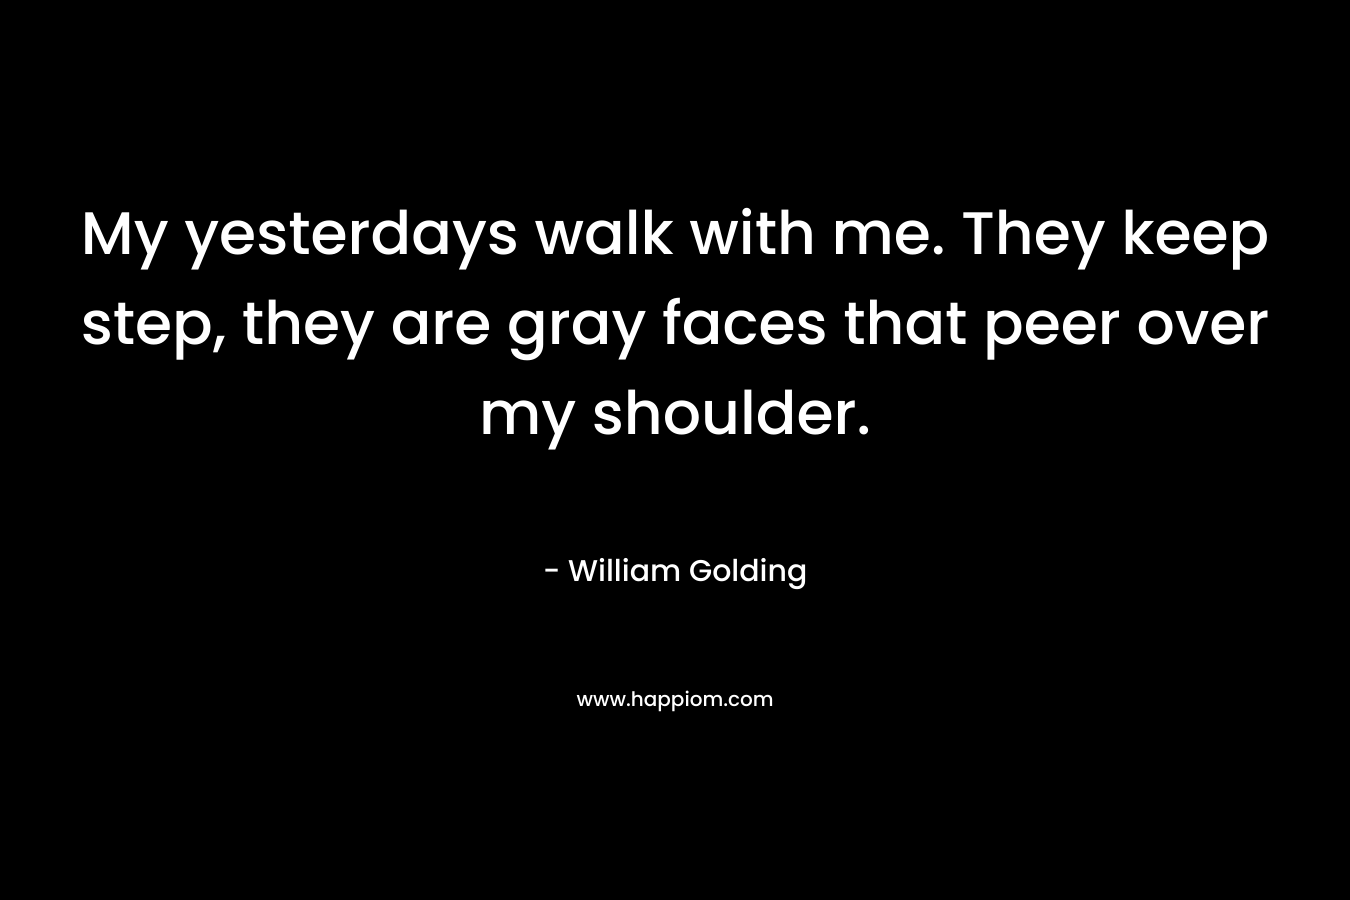 My yesterdays walk with me. They keep step, they are gray faces that peer over my shoulder. – William Golding